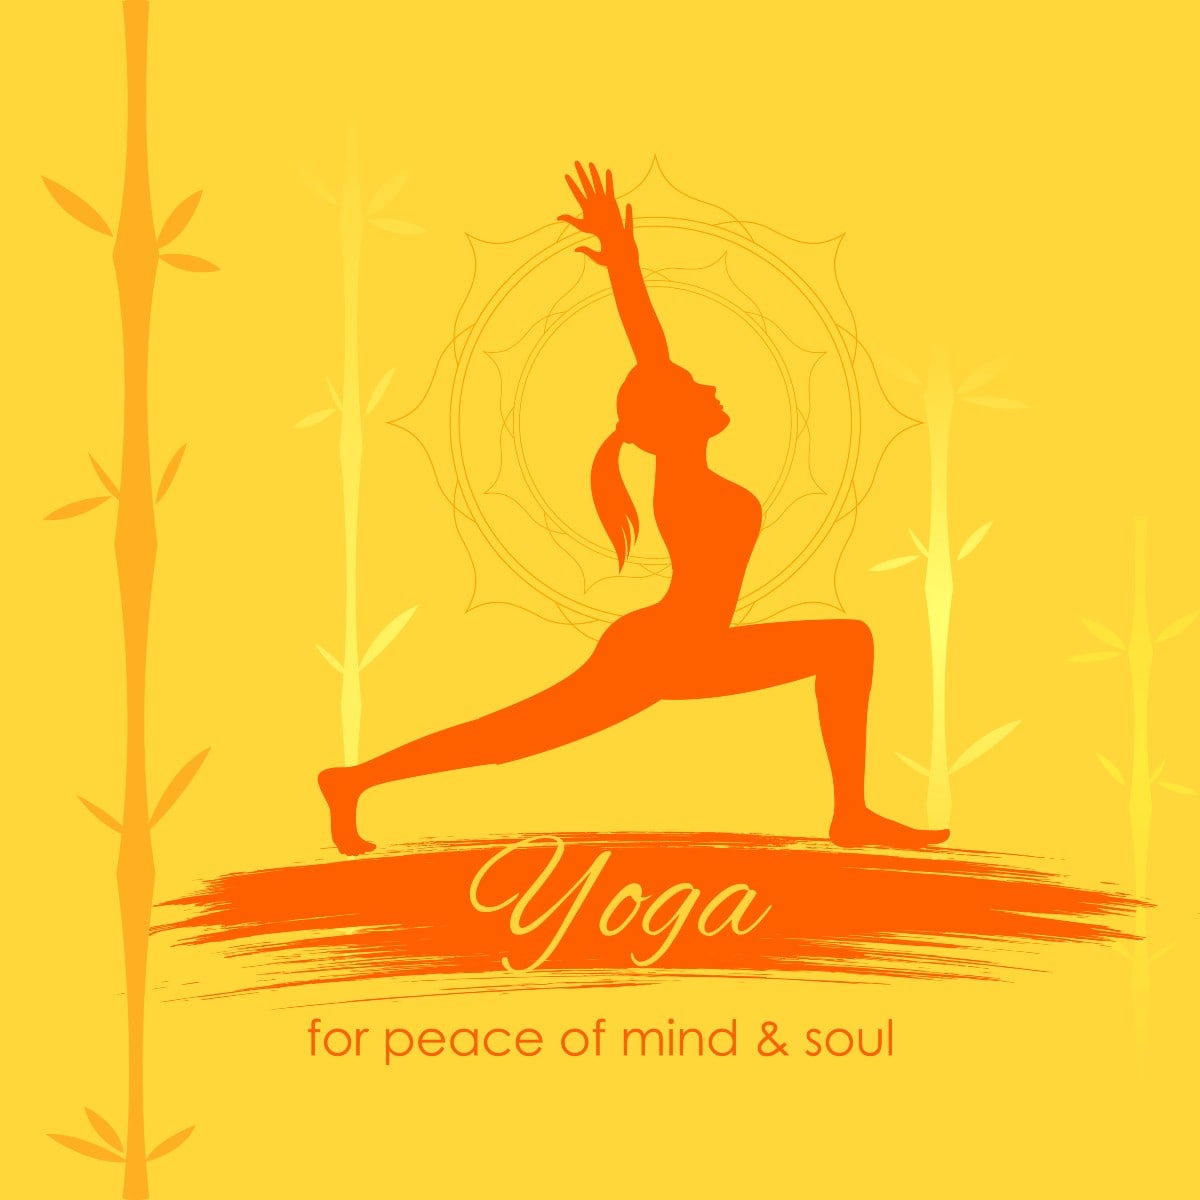 International Yoga Day 2022 Wishes: Images, Wishes, Quotes, Messages and WhatsApp Wishes to share.  (Image: Shutterstock)